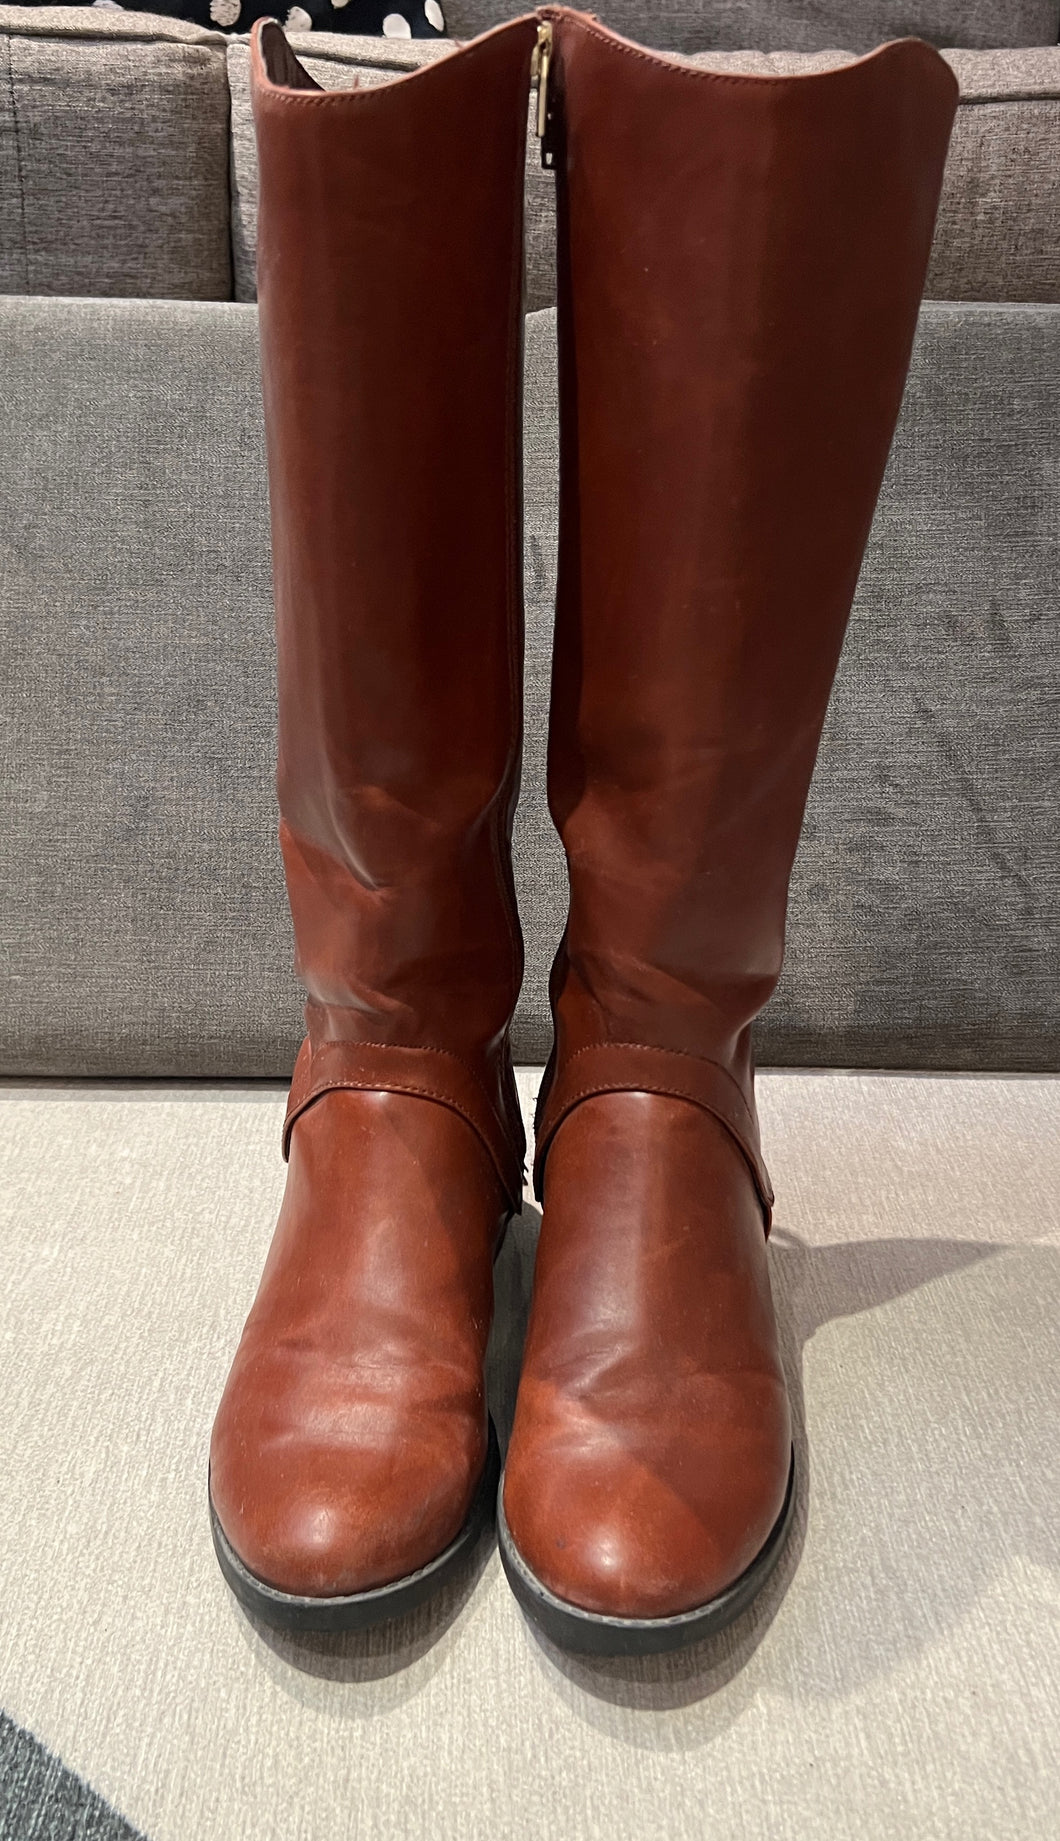 Brown tall riding boots 7.5